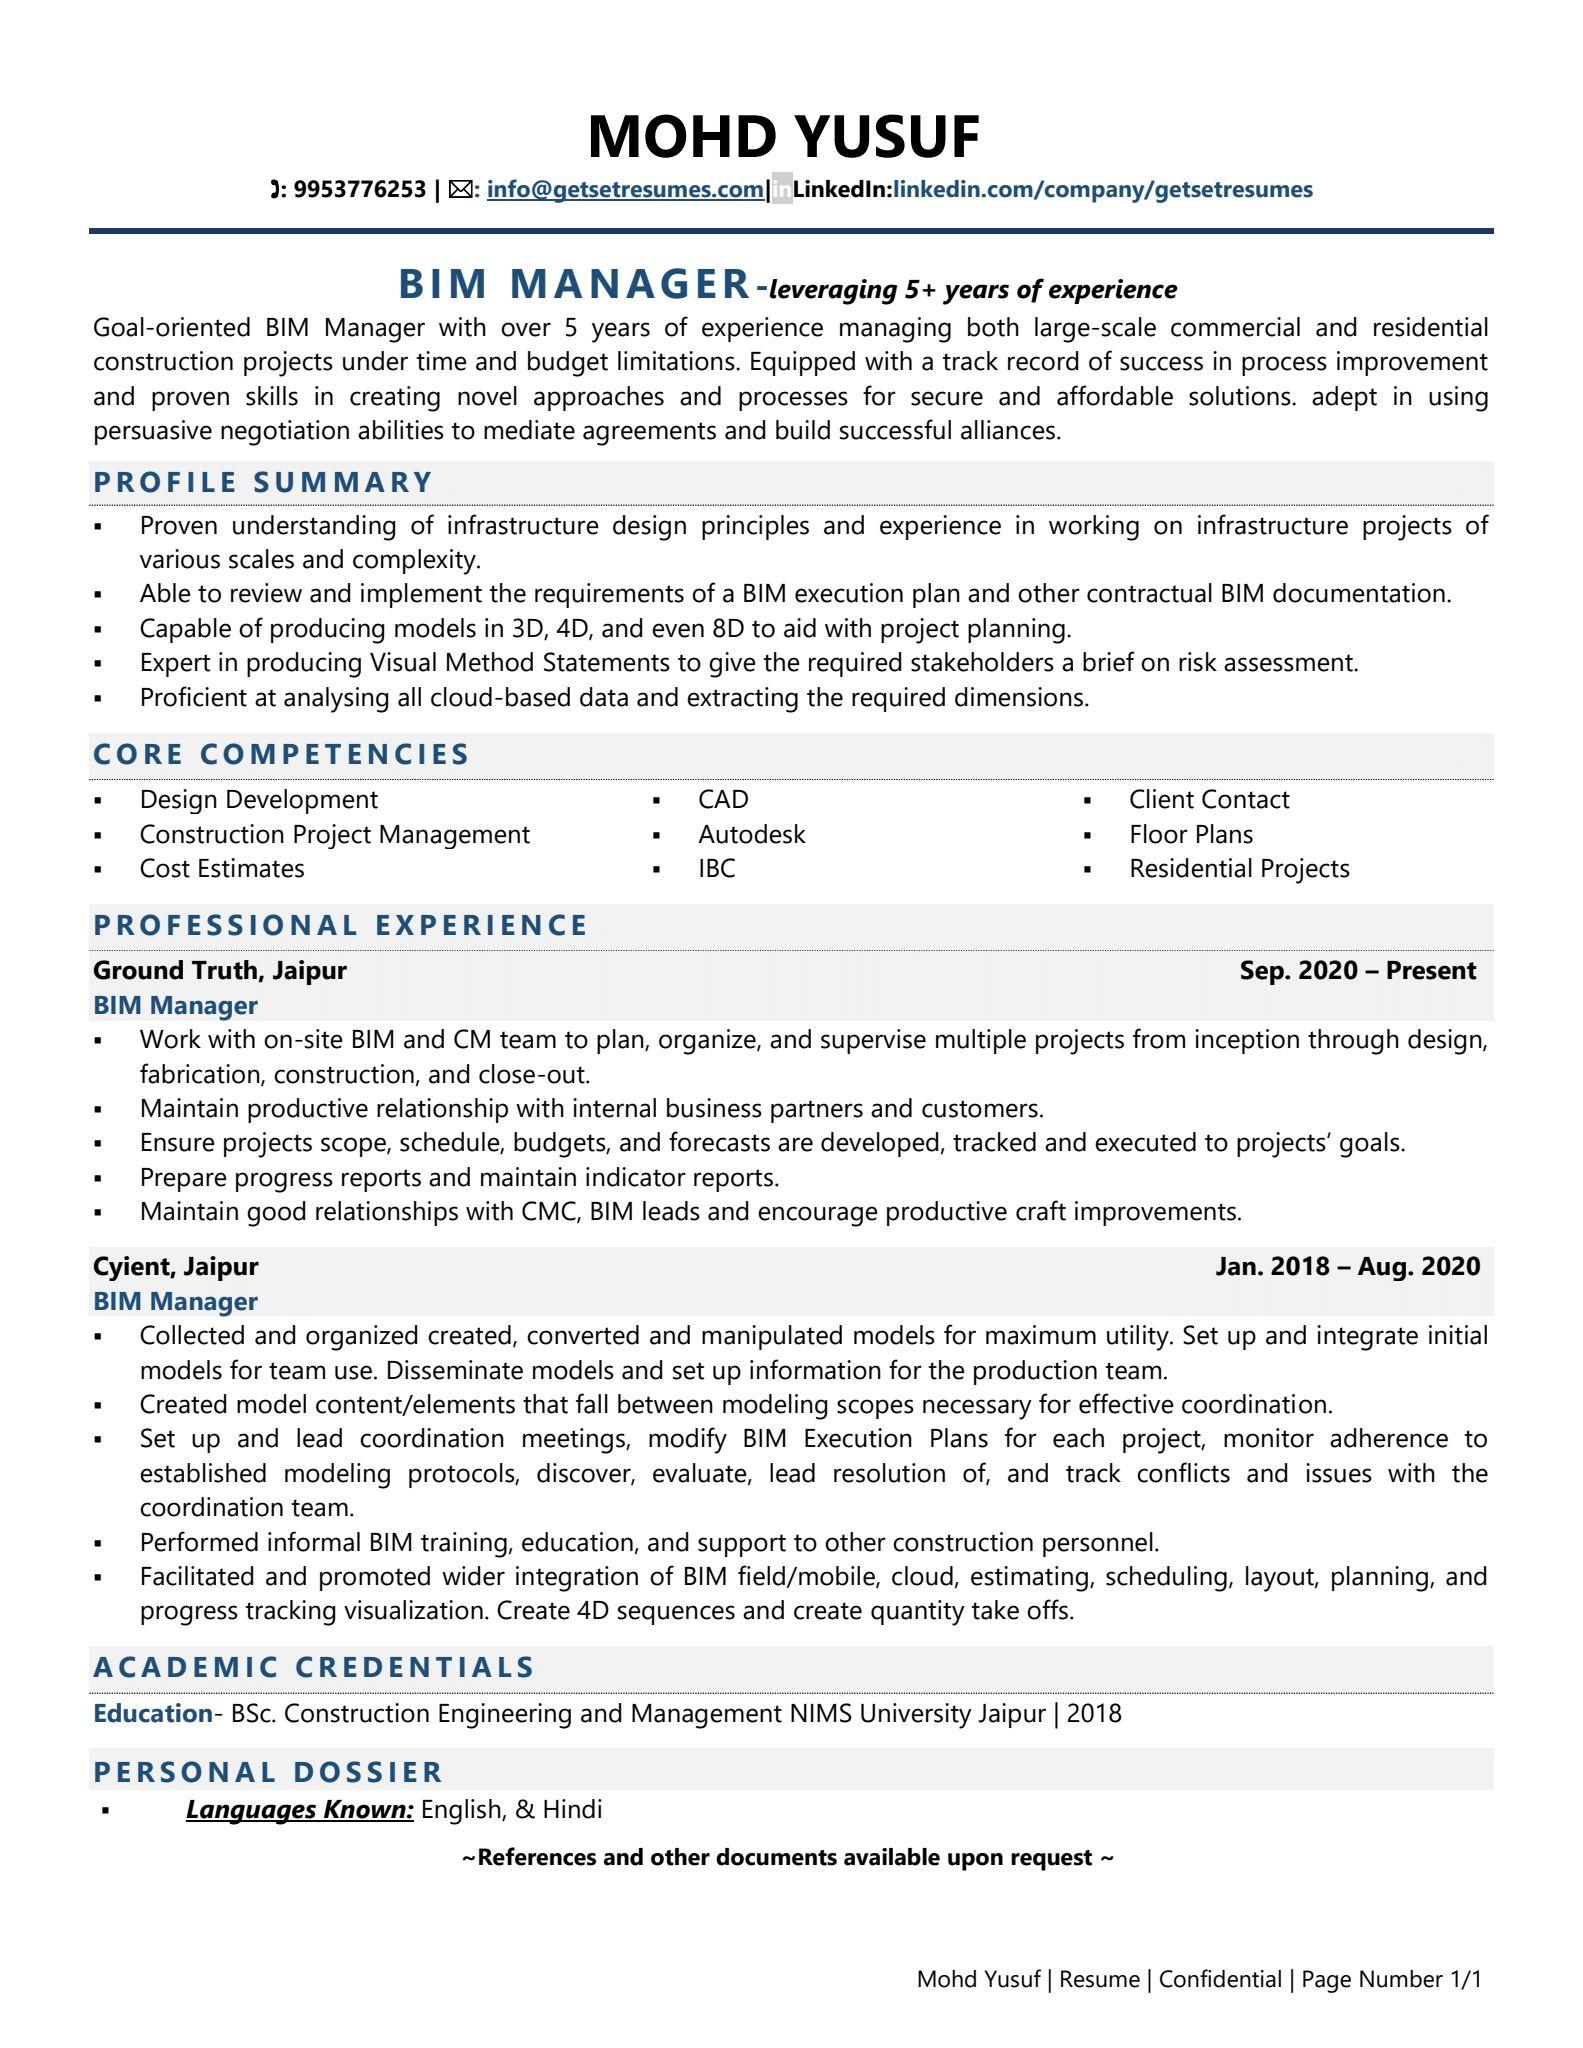 BIM Manager - Resume Example & Template